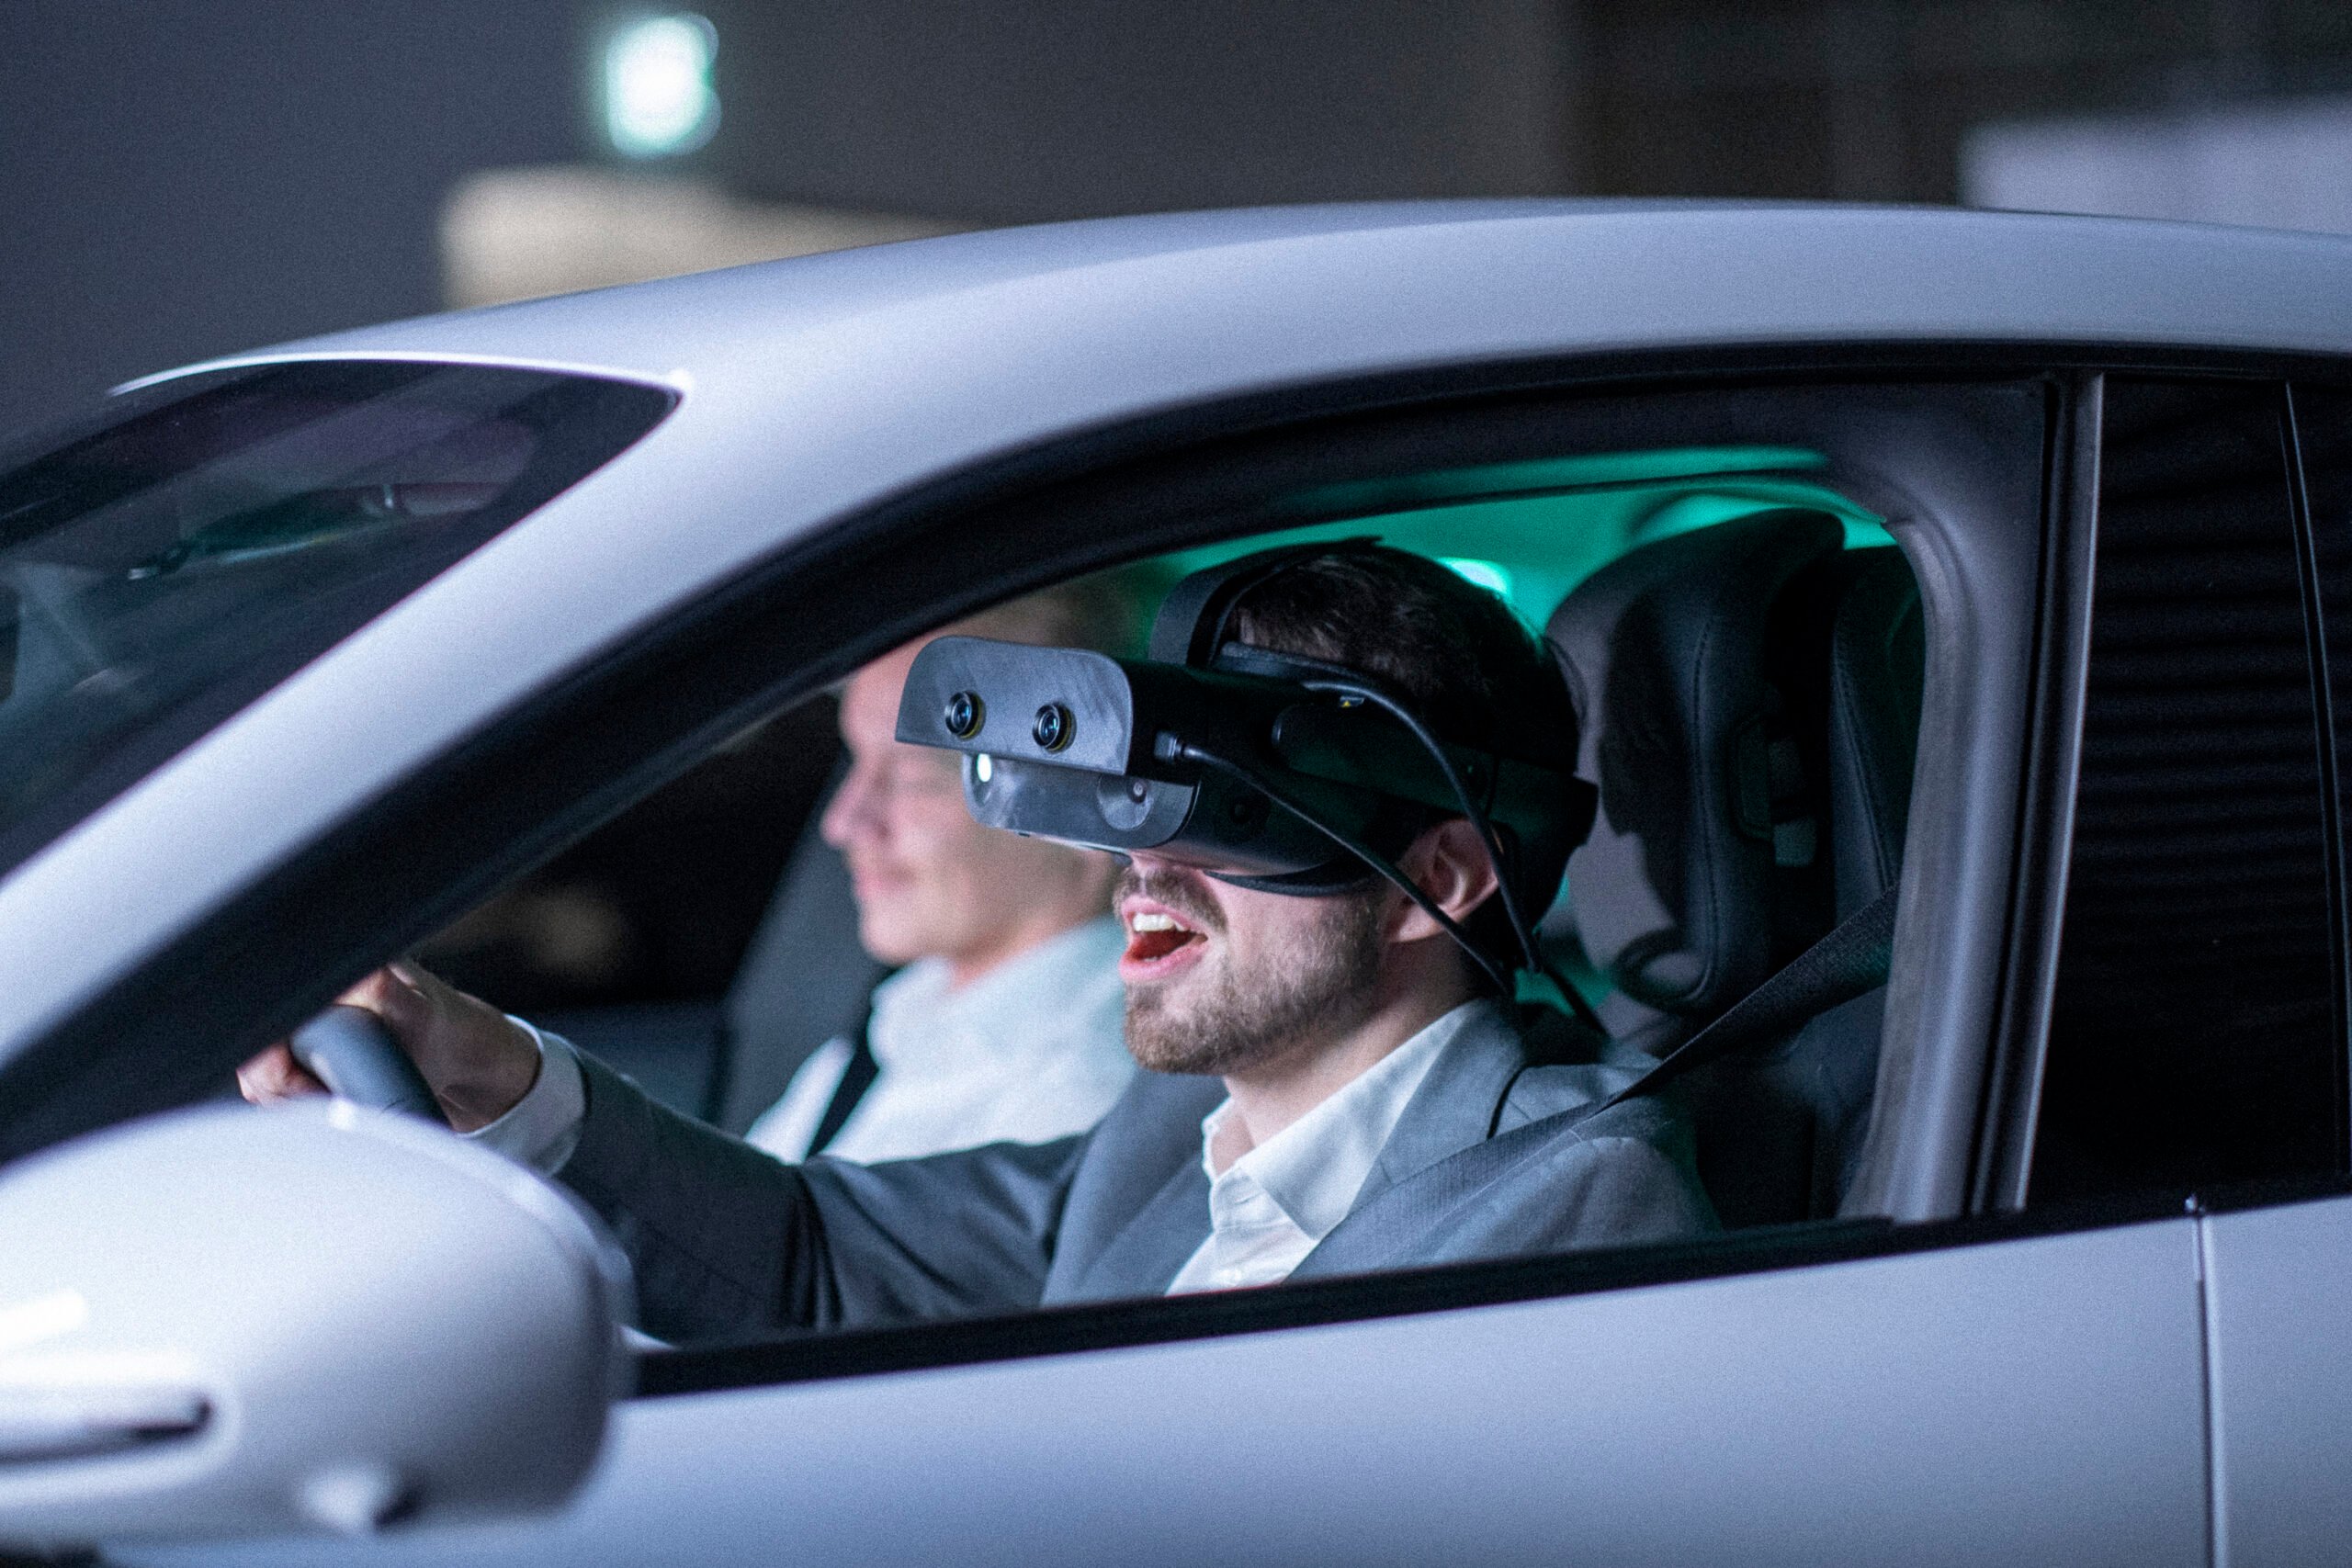 Mixed reality simulator enables true-to-life driving training